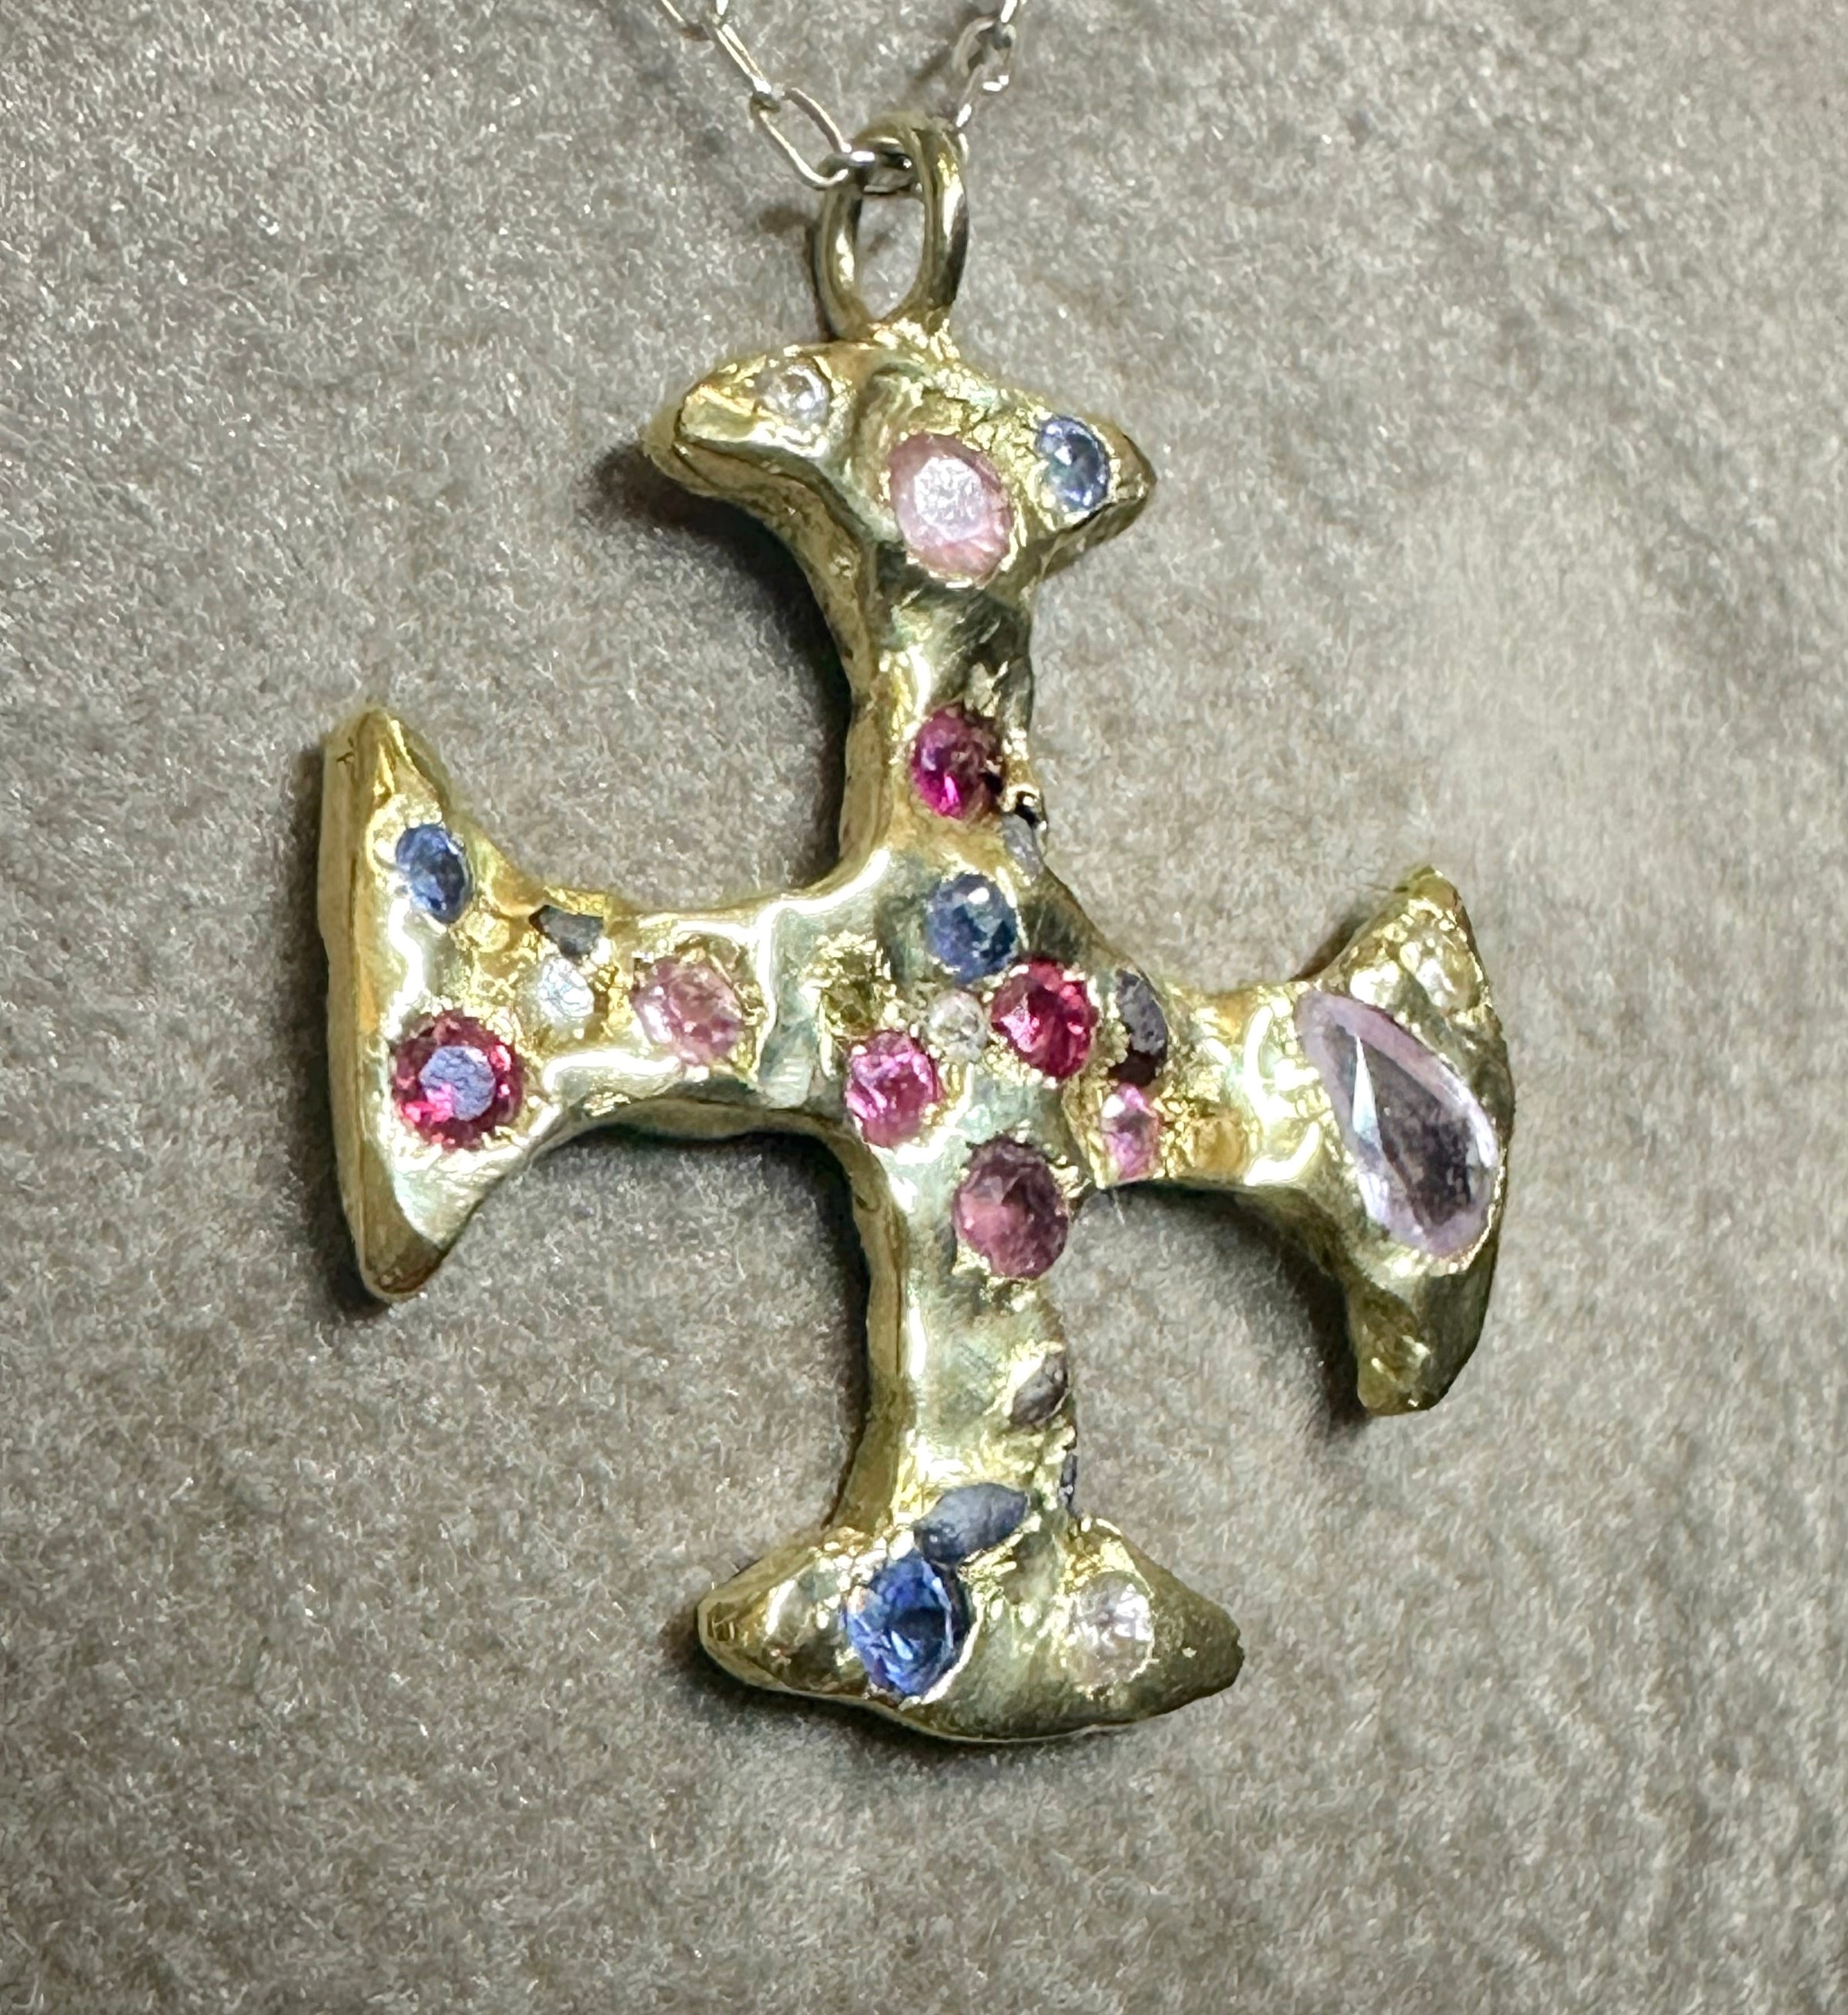 A One-of-a-Kind 18K Yellow Gold Cross Adorned with Sapphires